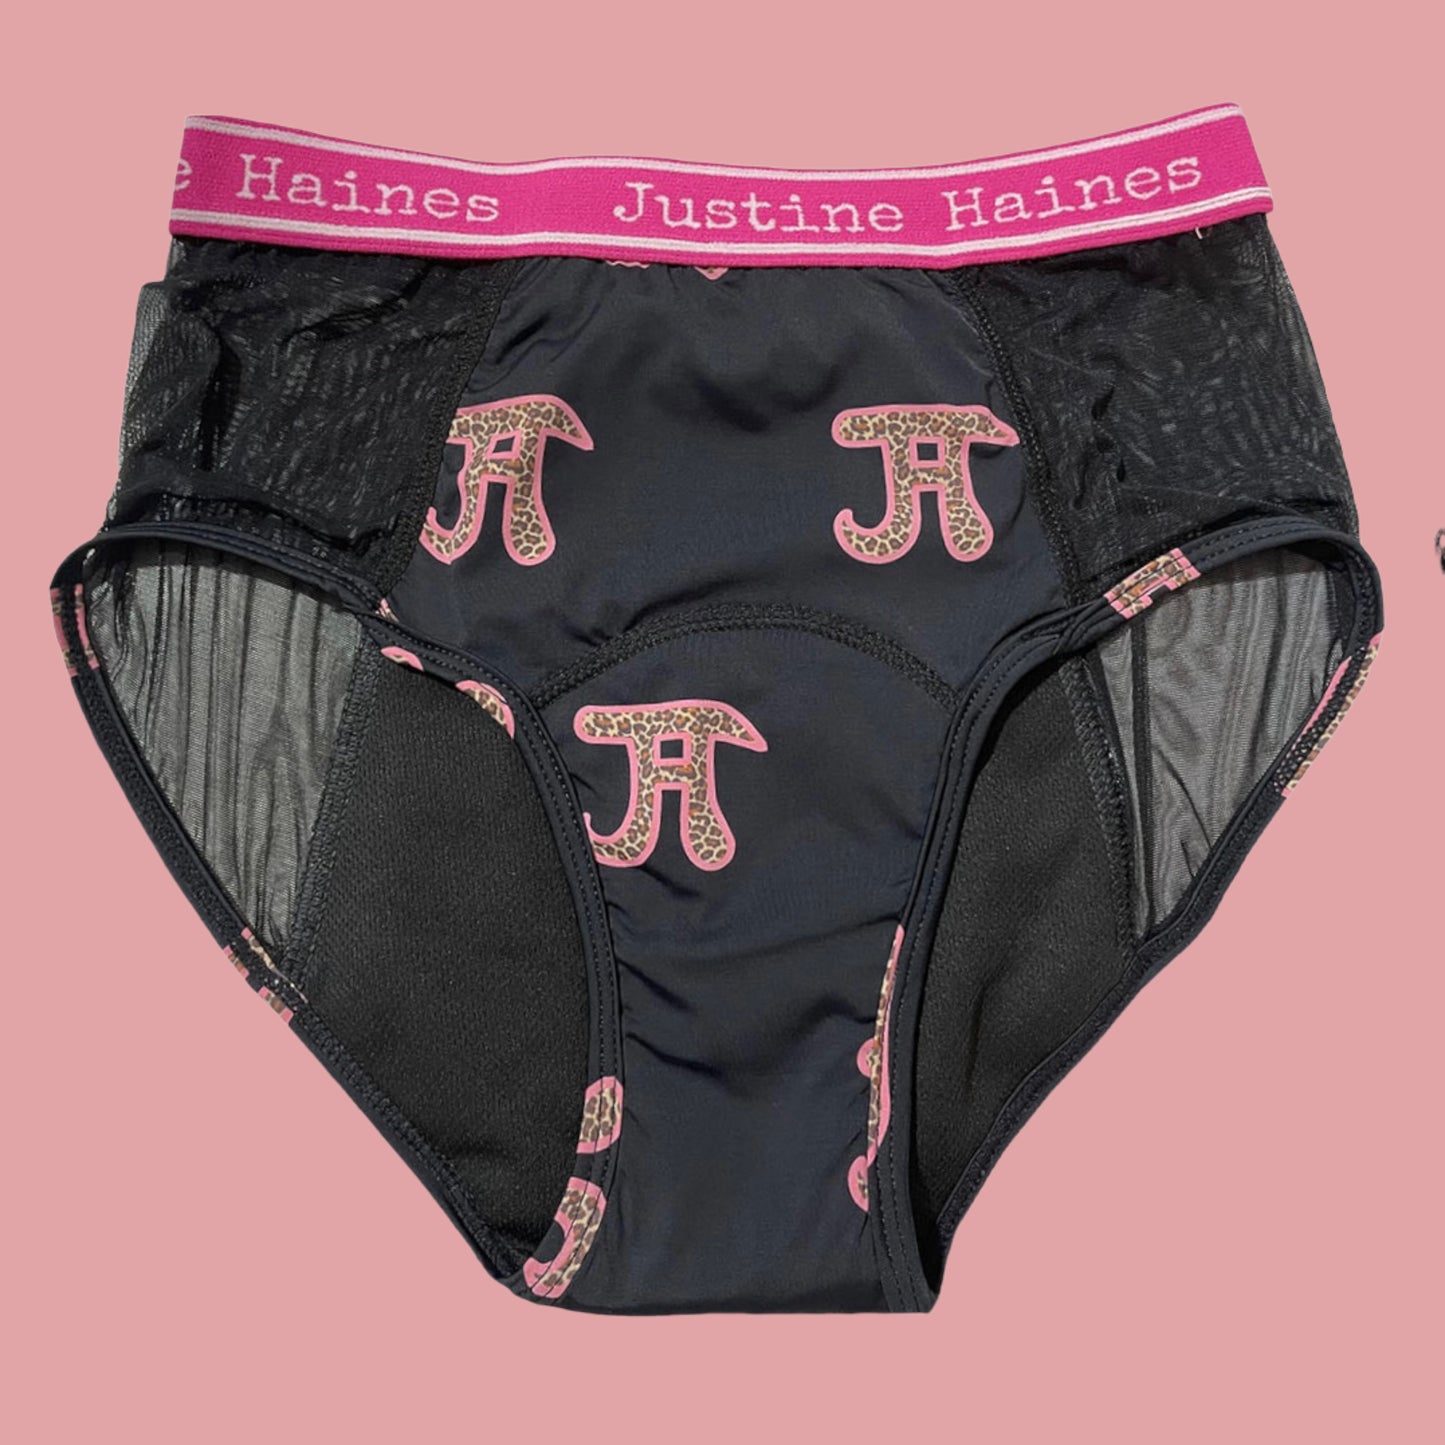 https://www.justinehaines.com/products/highrise-briefs-with-side-peek-a-boo-see-through-mesh-in-jh-logo-with-leopard